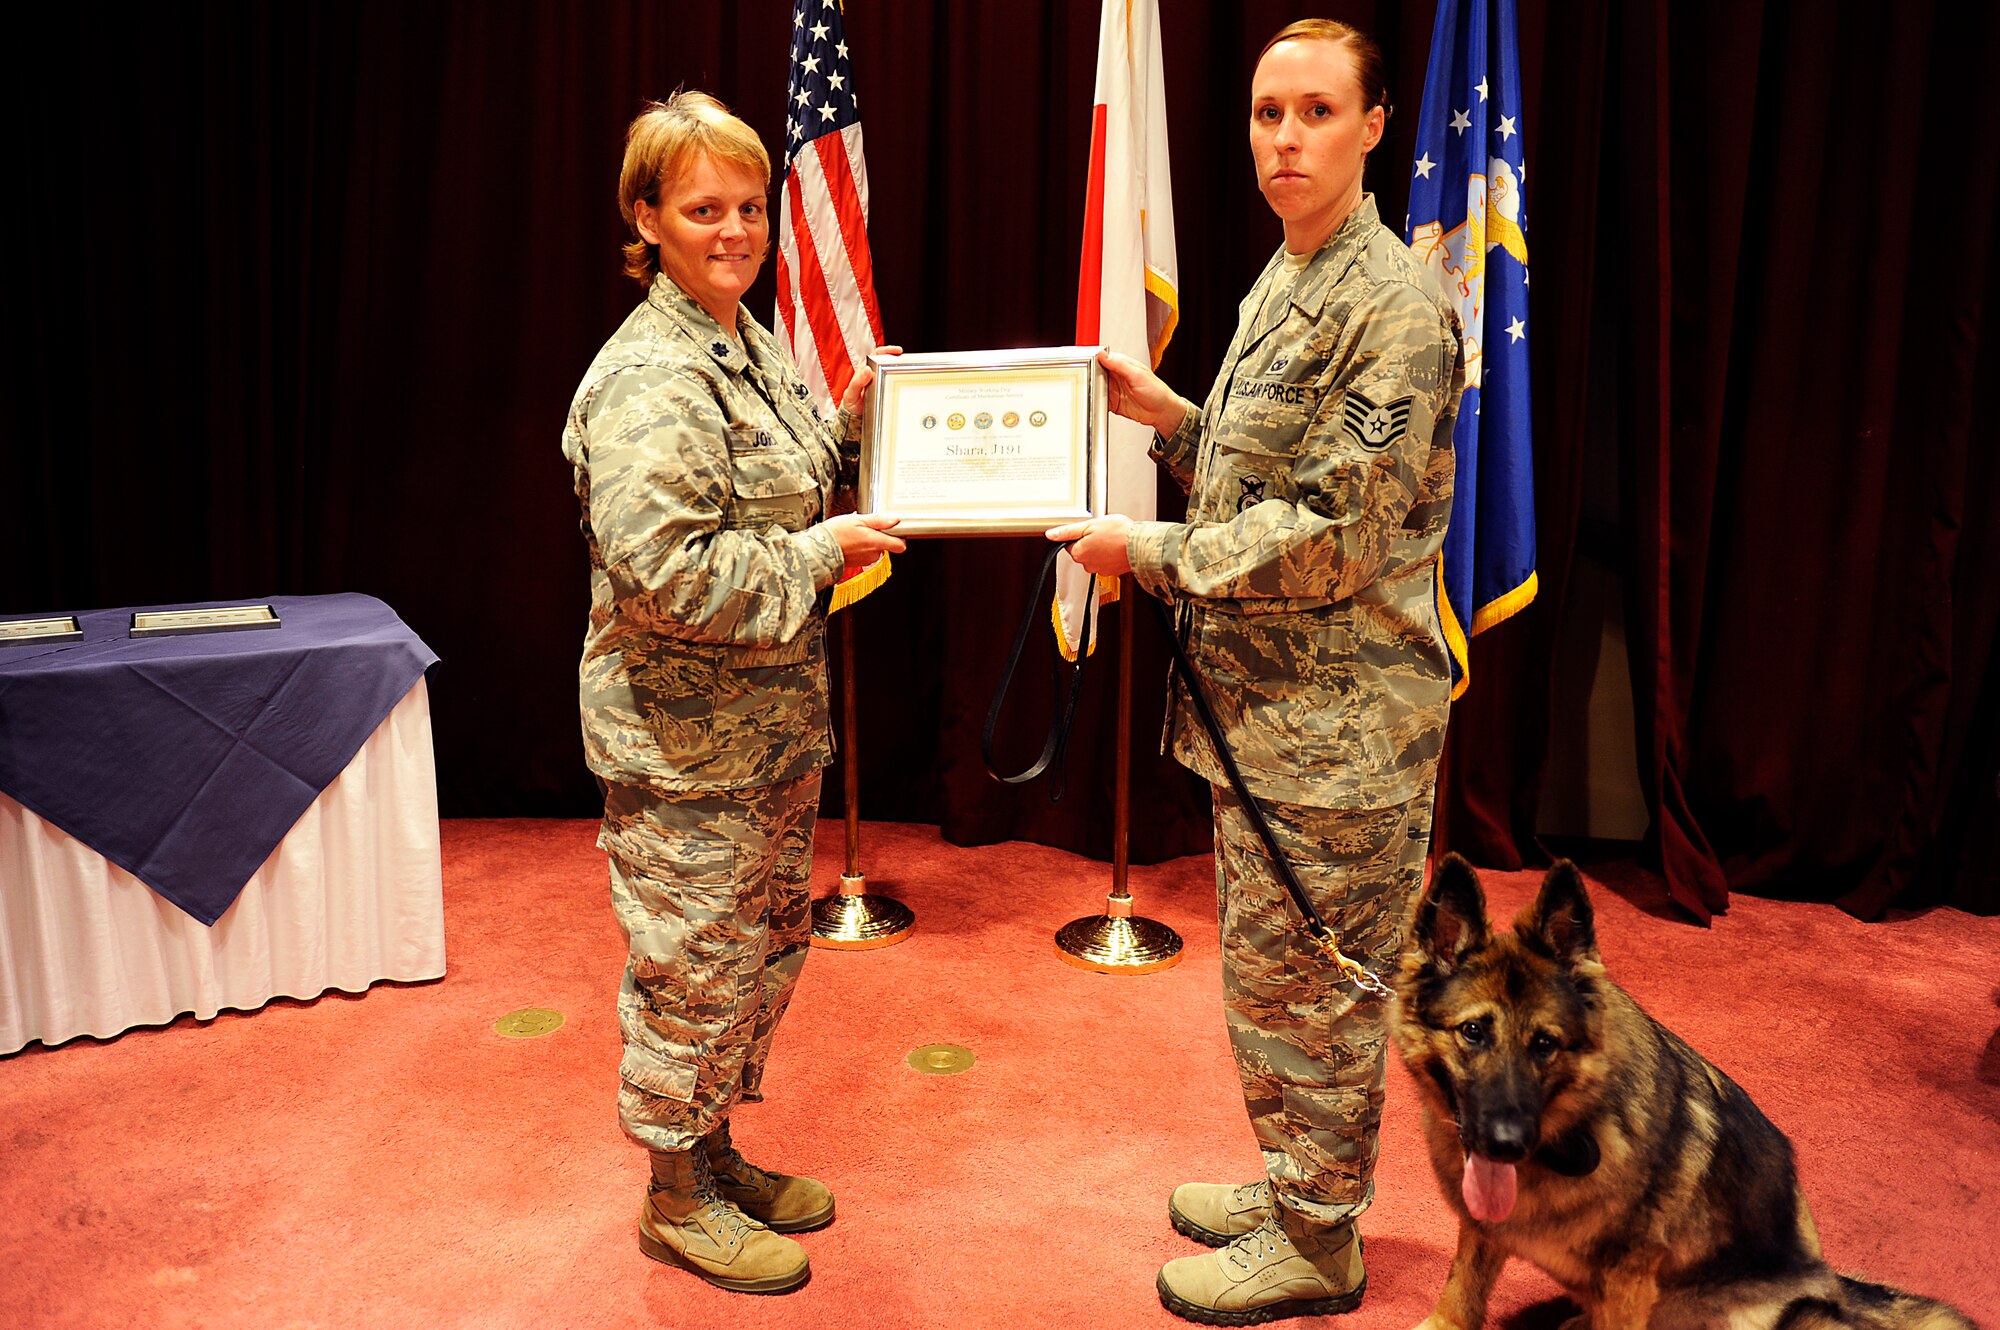 U.S. Air Force Lt. Col. Kathy Jordan, 18th Security Forces Squadron commander, presents Staff Sgt. Codi Carter, 18th SFS military working dog trainer, and her newly adopted MWD, Shara, a MWD Certificate of Meritorious Service during the MWD retirement ceremony on Kadena Air Base, Japan, June 13, 2013. MWD Shara performed nearly 16,000 detector sweeps during her service. Carter is Shara’s 10th and final handler. (U.S. Air Force photo by Senior Airman Maeson L. Elleman/Released) 